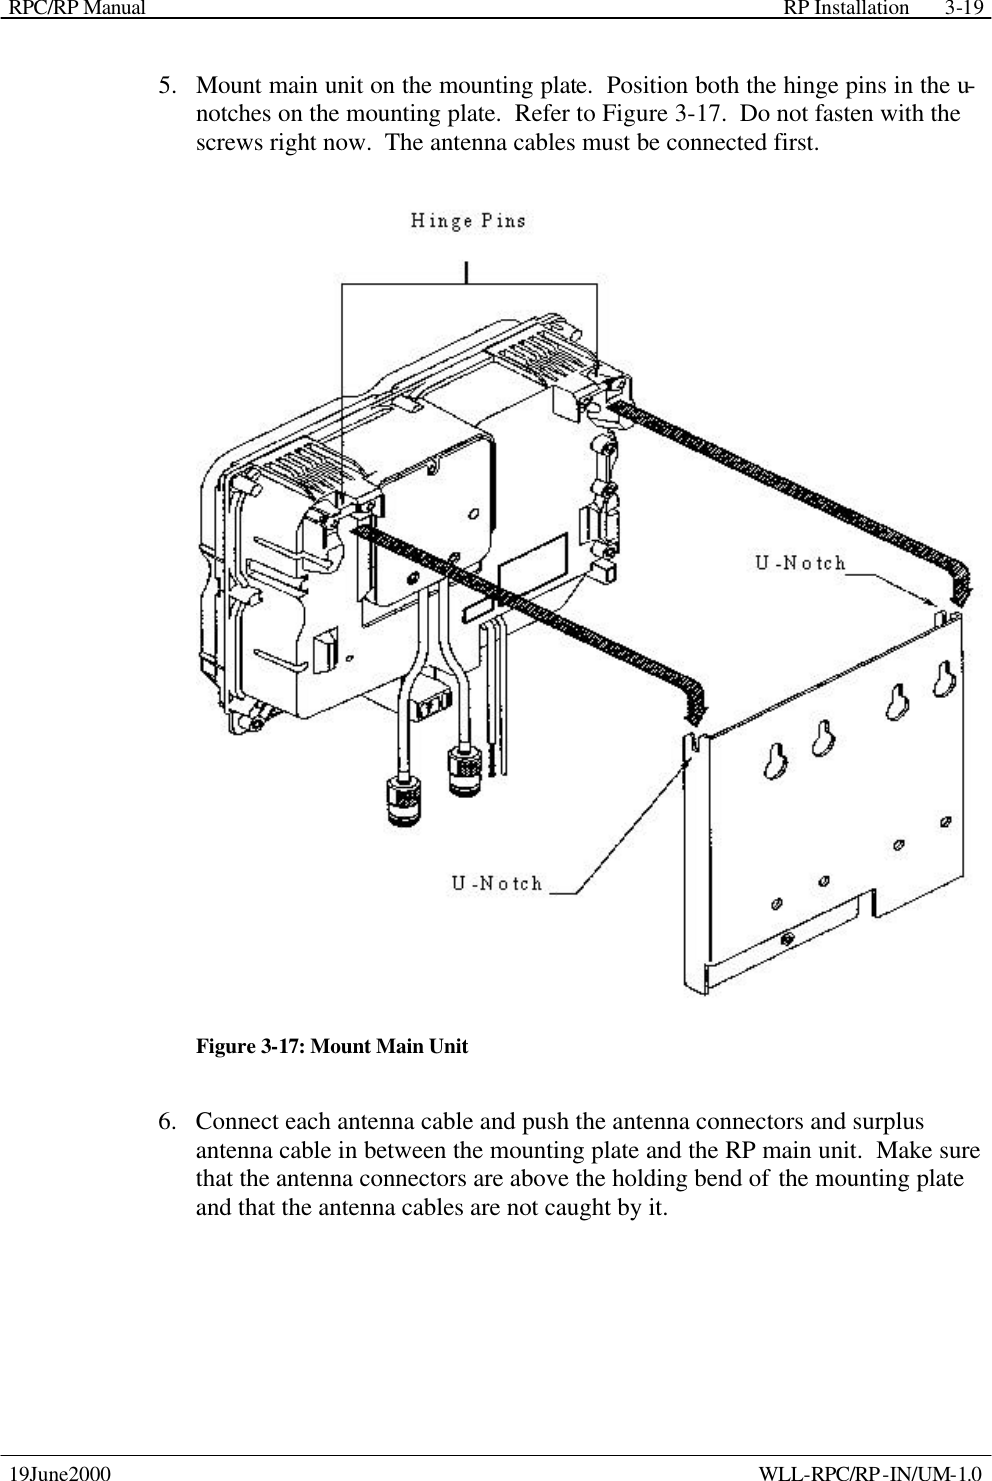 RPC/RP Manual    RP Installation  19June2000    WLL-RPC/RP-IN/UM-1.0 3-195.  Mount main unit on the mounting plate.  Position both the hinge pins in the u-notches on the mounting plate.  Refer to Figure 3-17.  Do not fasten with the screws right now.  The antenna cables must be connected first.  Figure 3-17: Mount Main Unit 6.  Connect each antenna cable and push the antenna connectors and surplus antenna cable in between the mounting plate and the RP main unit.  Make sure that the antenna connectors are above the holding bend of the mounting plate and that the antenna cables are not caught by it. 